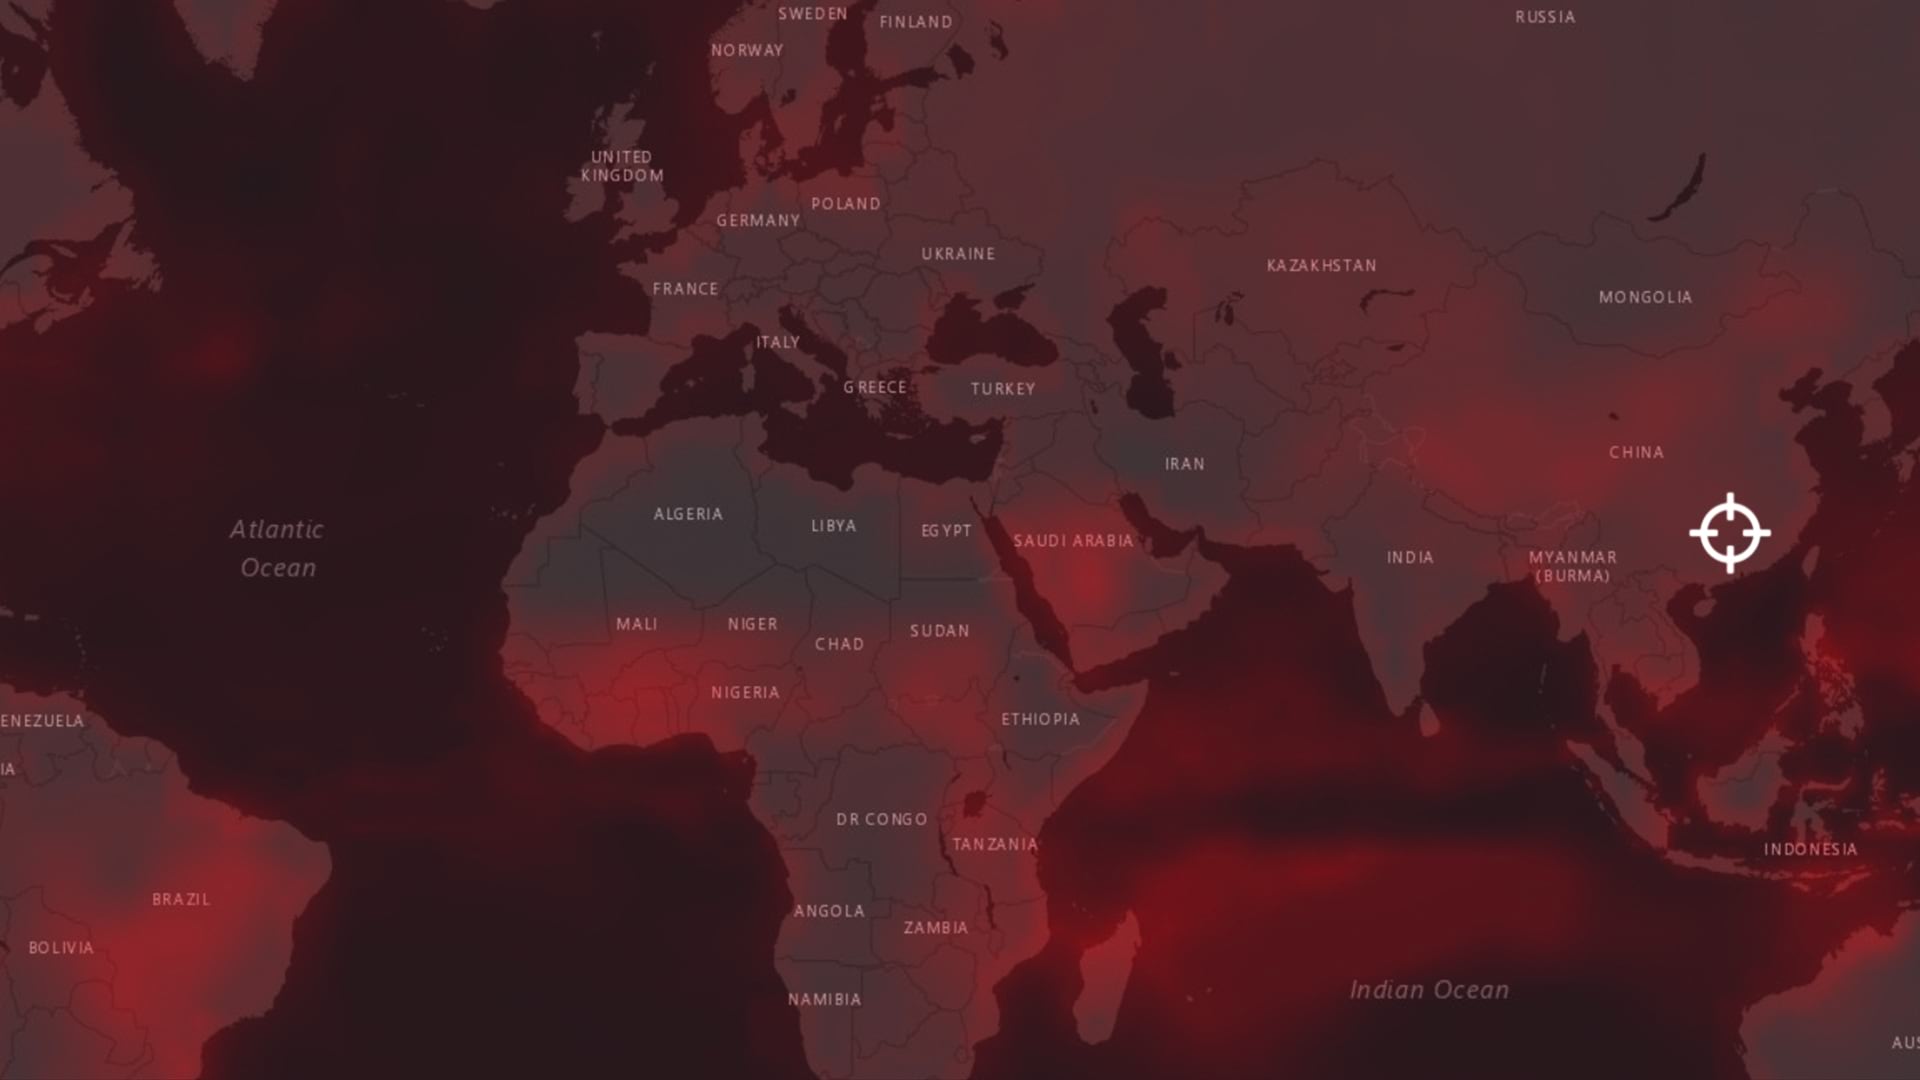 Mapping the effects of climate change worldwide